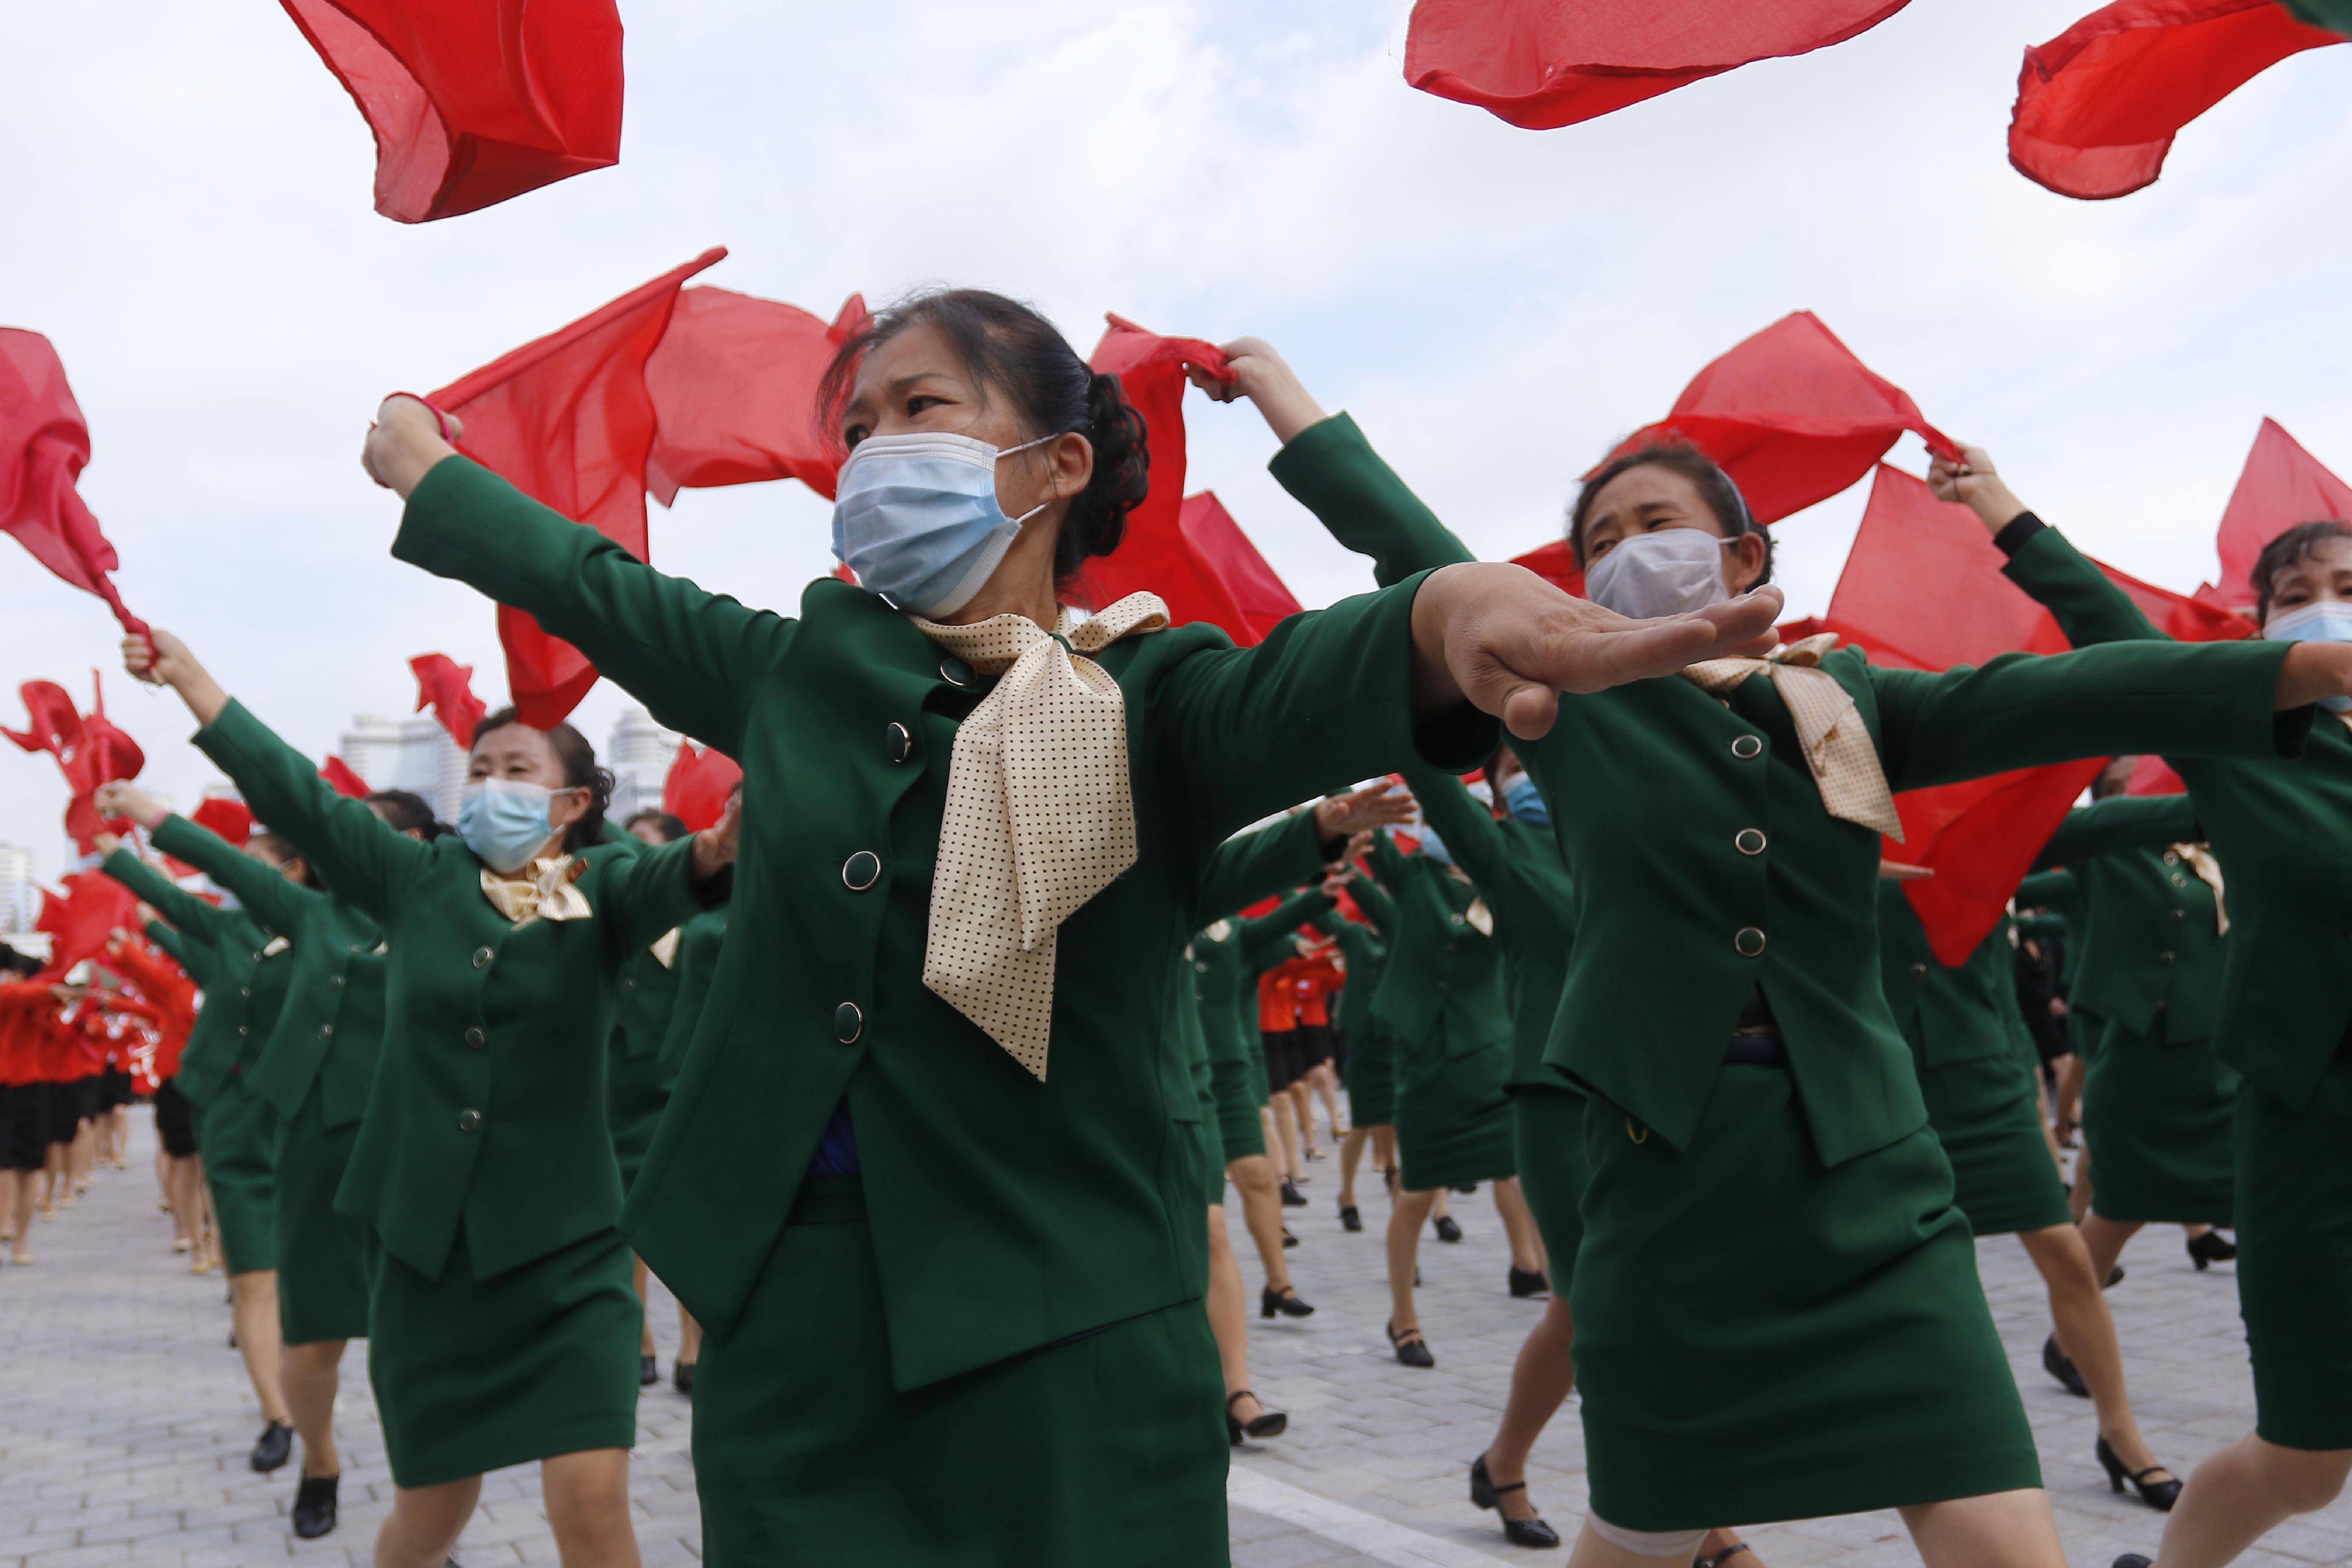 Women wearing face masks to help curb the spread of the coronavirus parade with flags during a rally to welcome the 8th Congress of the Workers' Party of Korea at Kim Il Sung Square in Pyongyang, North Korea, Monday, Oct. 12, 2020. (AP Photo/Jon Chol Jin)